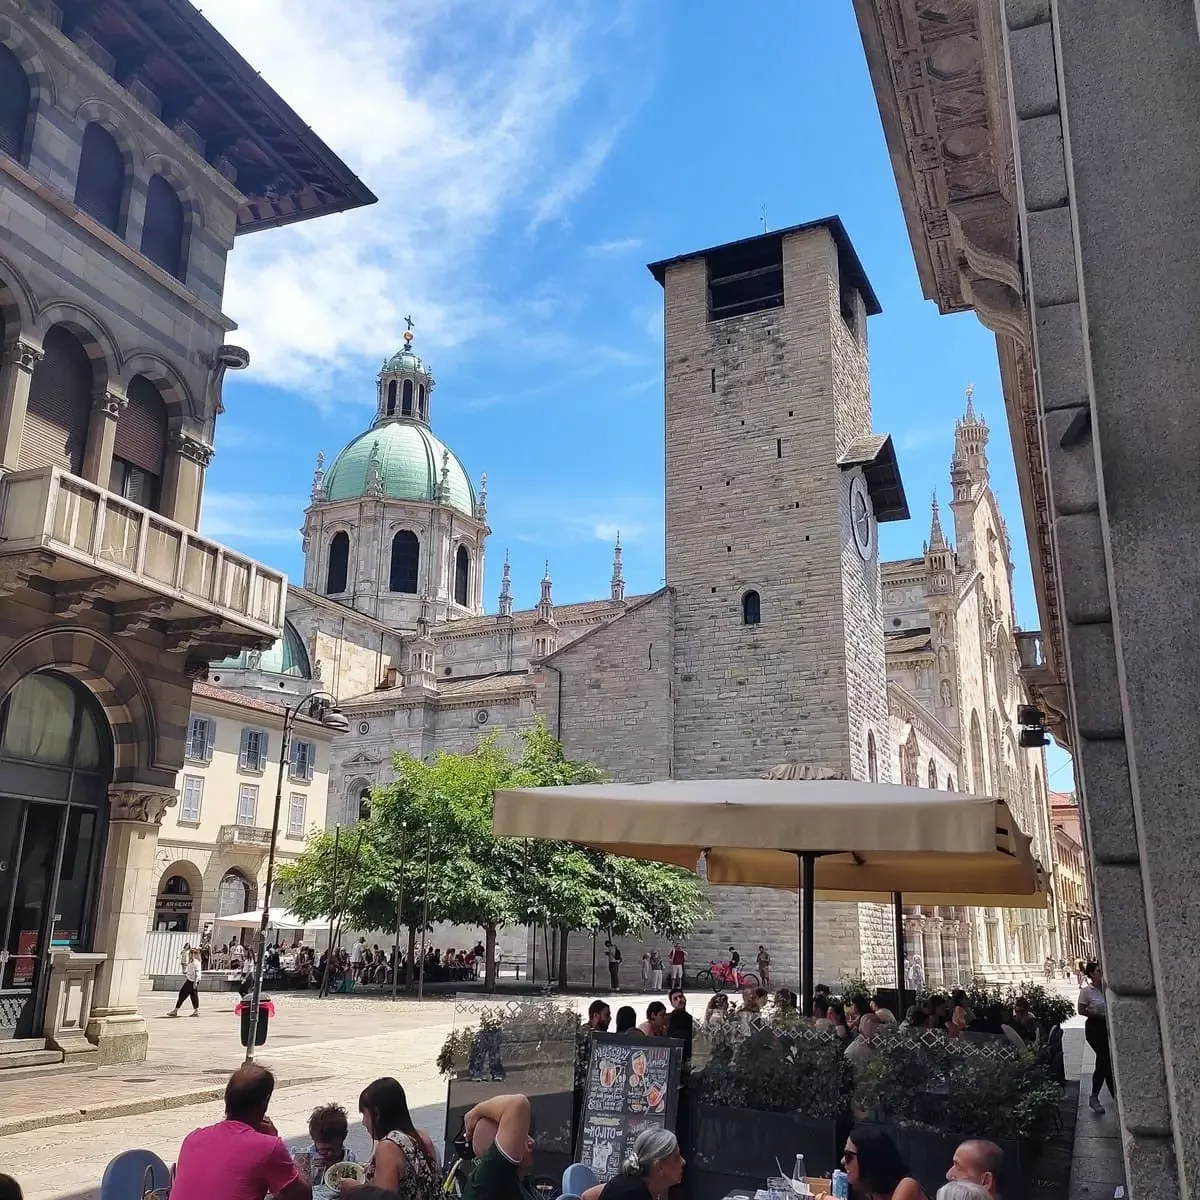 Around Como's main square with the impressive church you will find plenty of cafes and restaurants